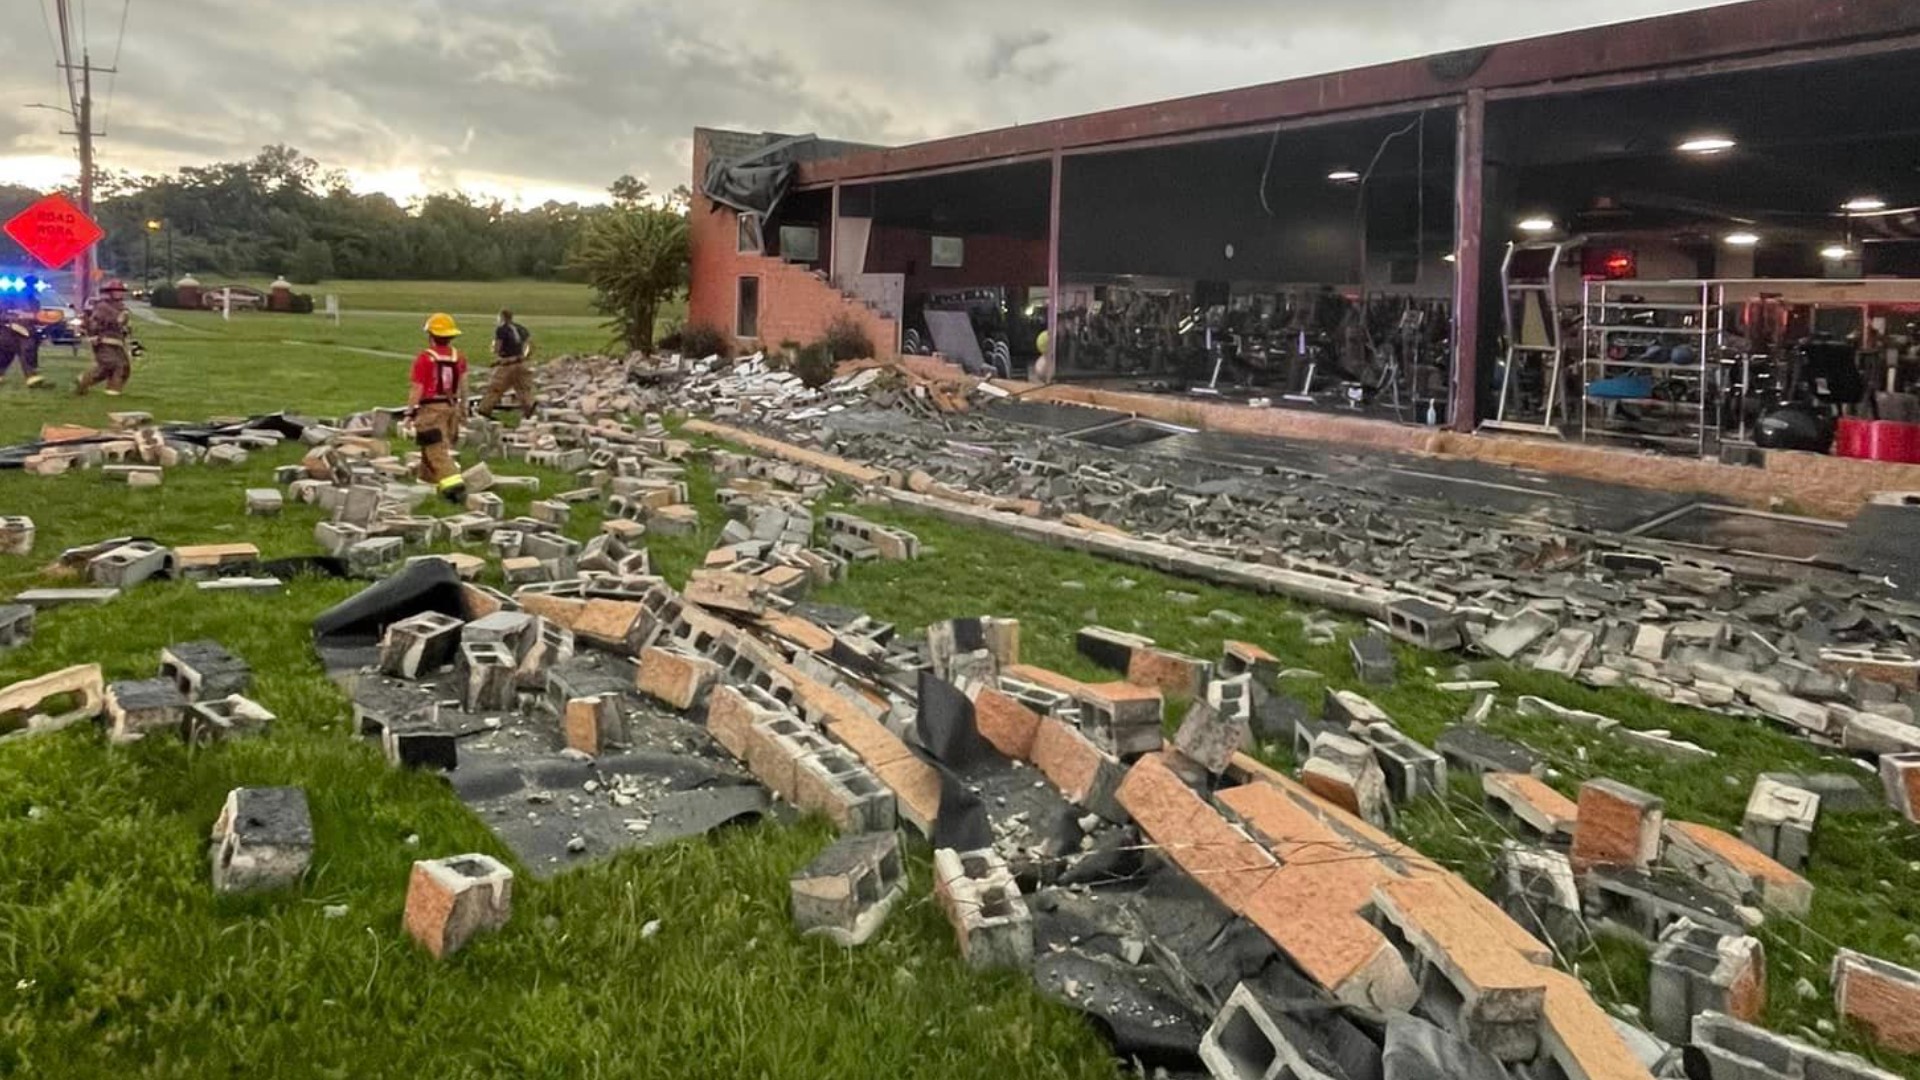 An exterior wall of a gym in Calhoun was ripped off due to strong winds and storms moving through north Georgia and the metro Thursday evening, police said.